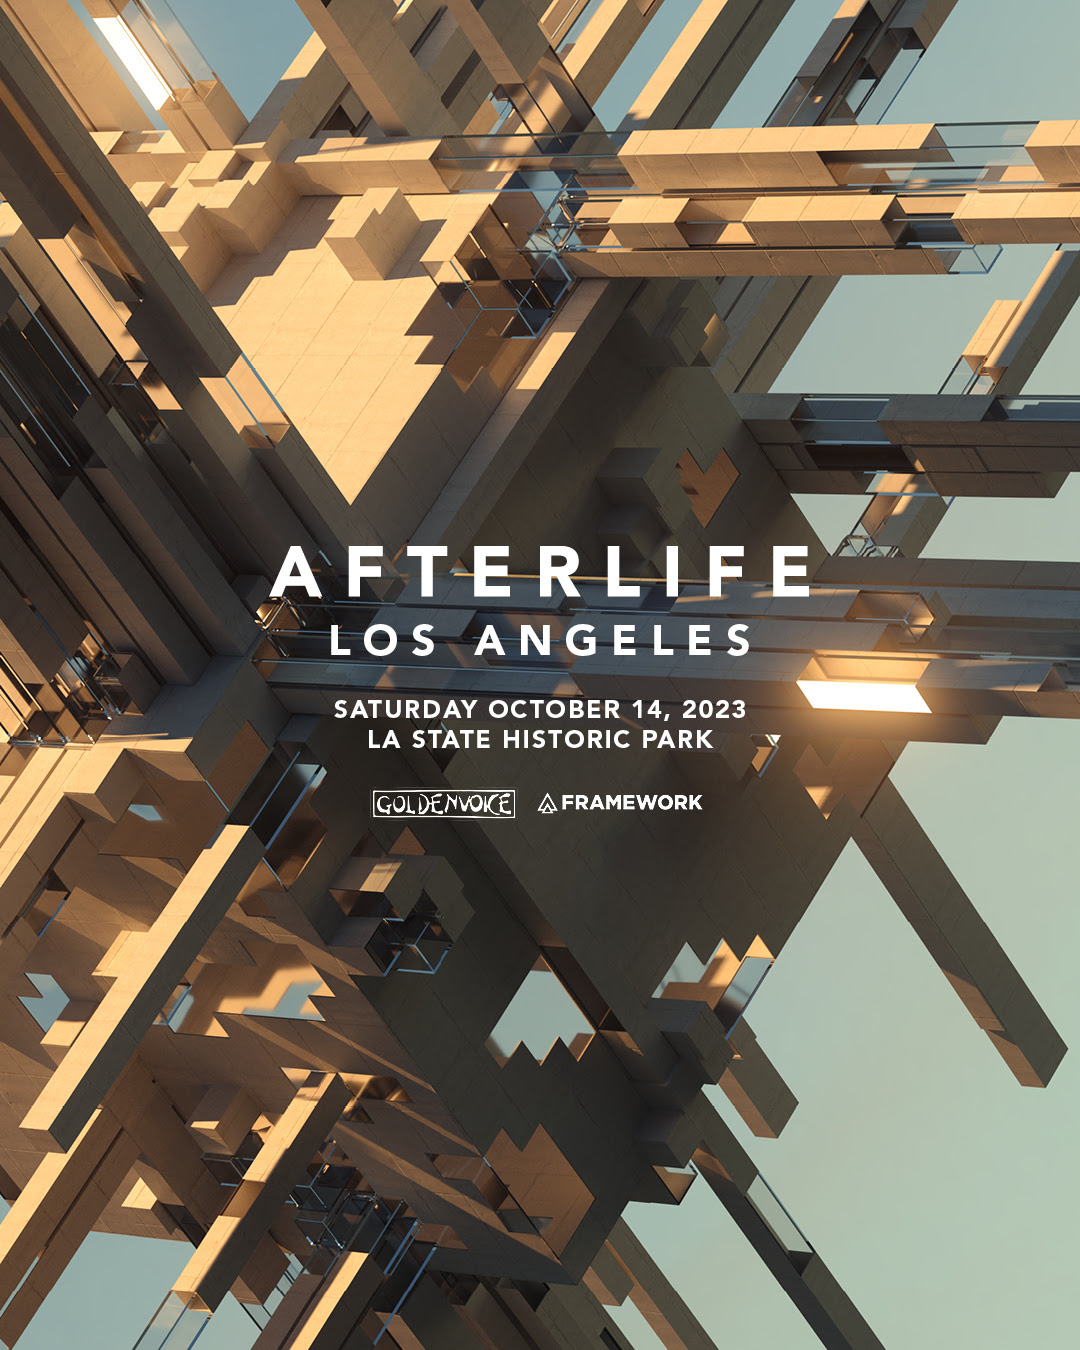 AFTERLIFE LOS ANGELES